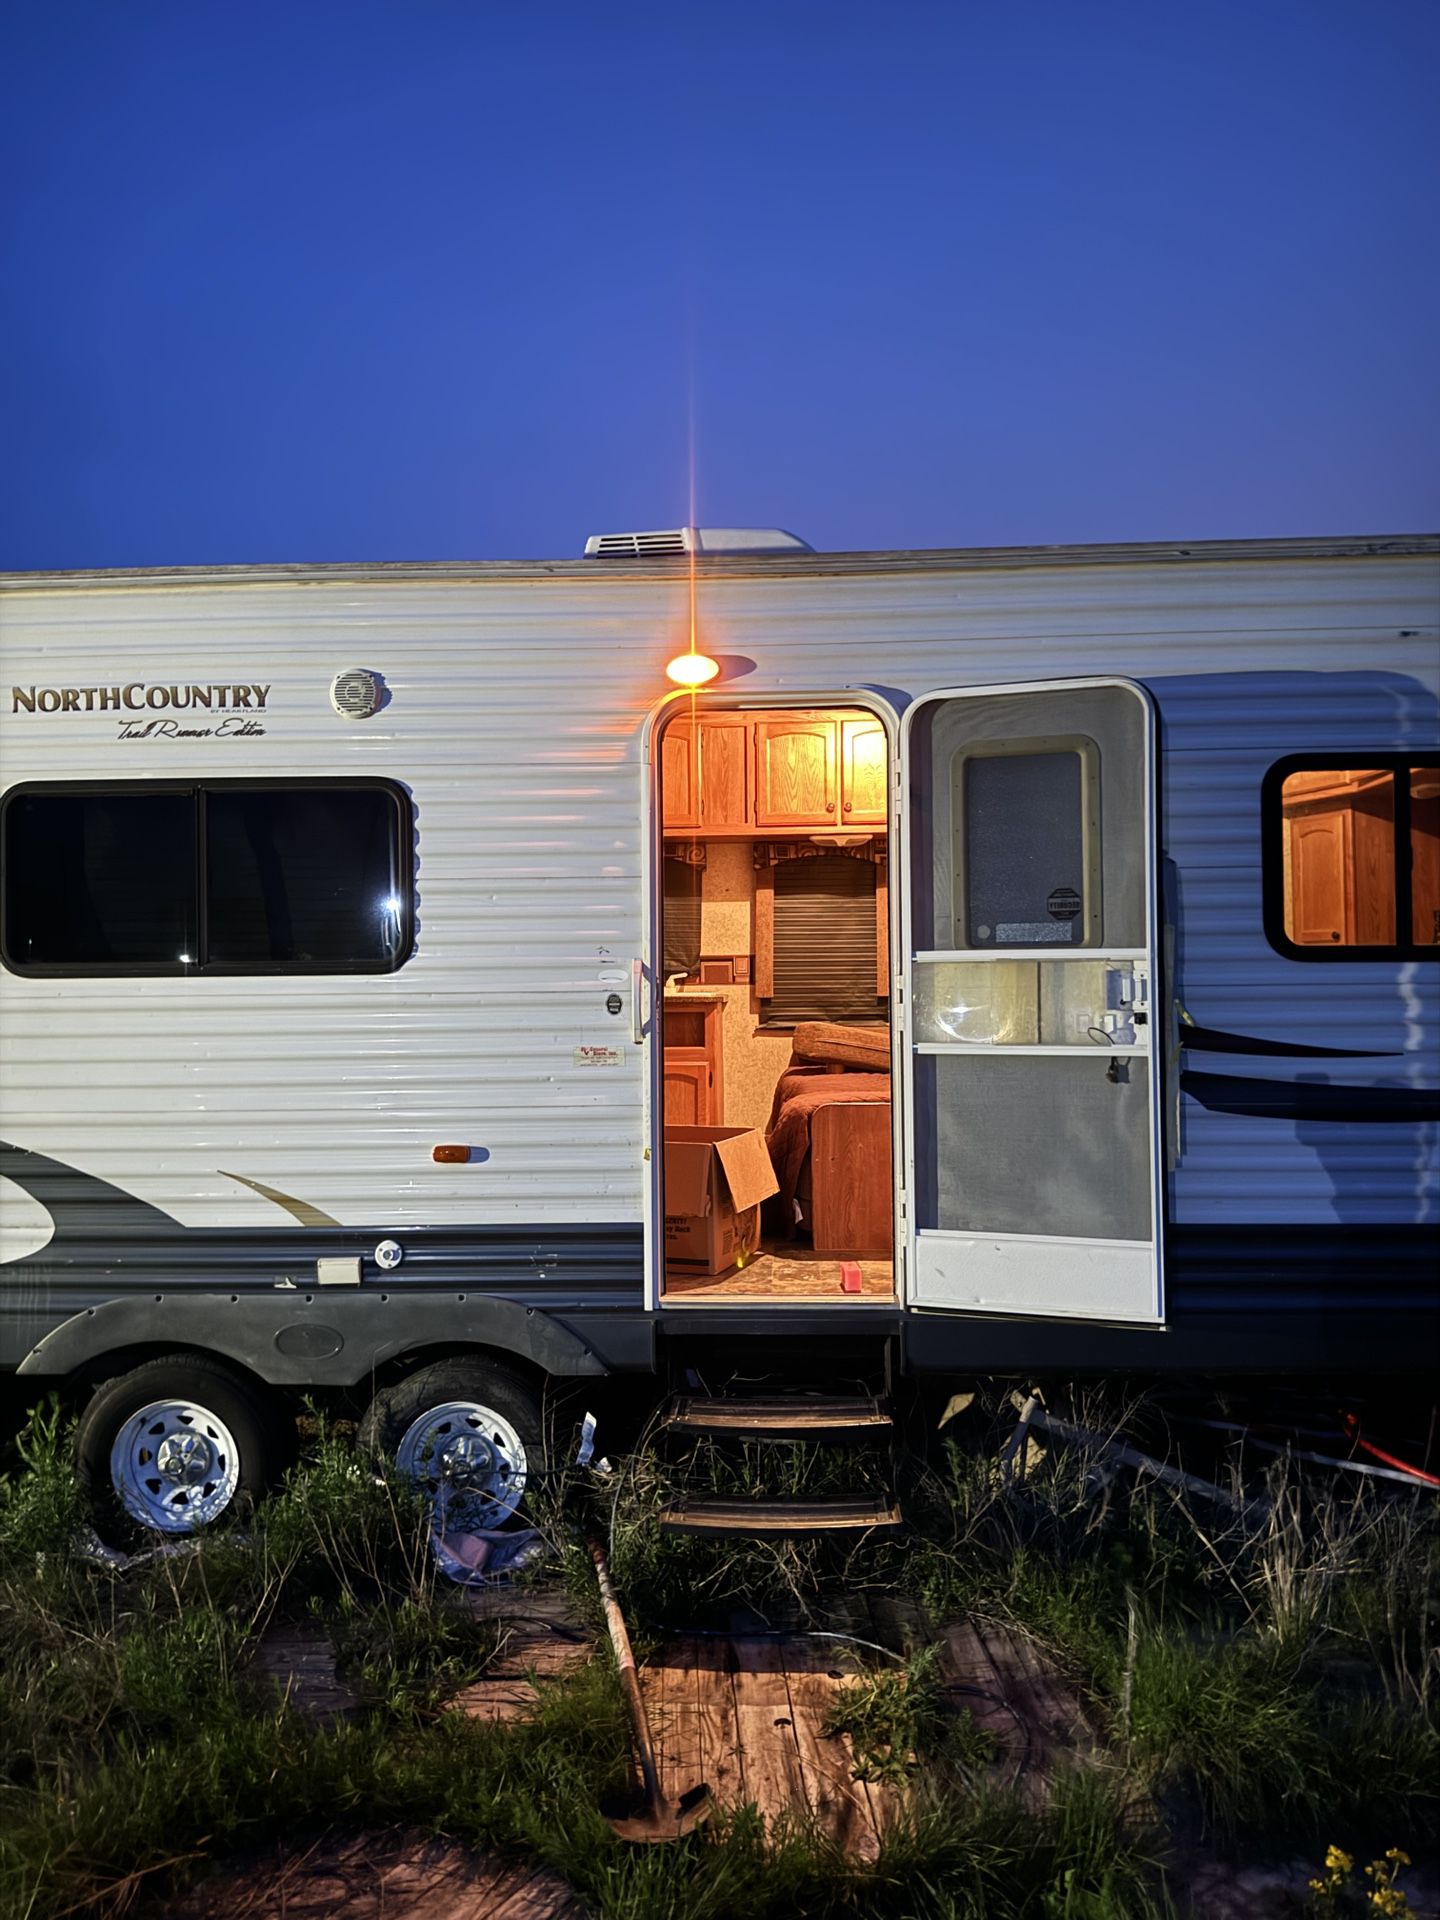 2011 North country RV. 